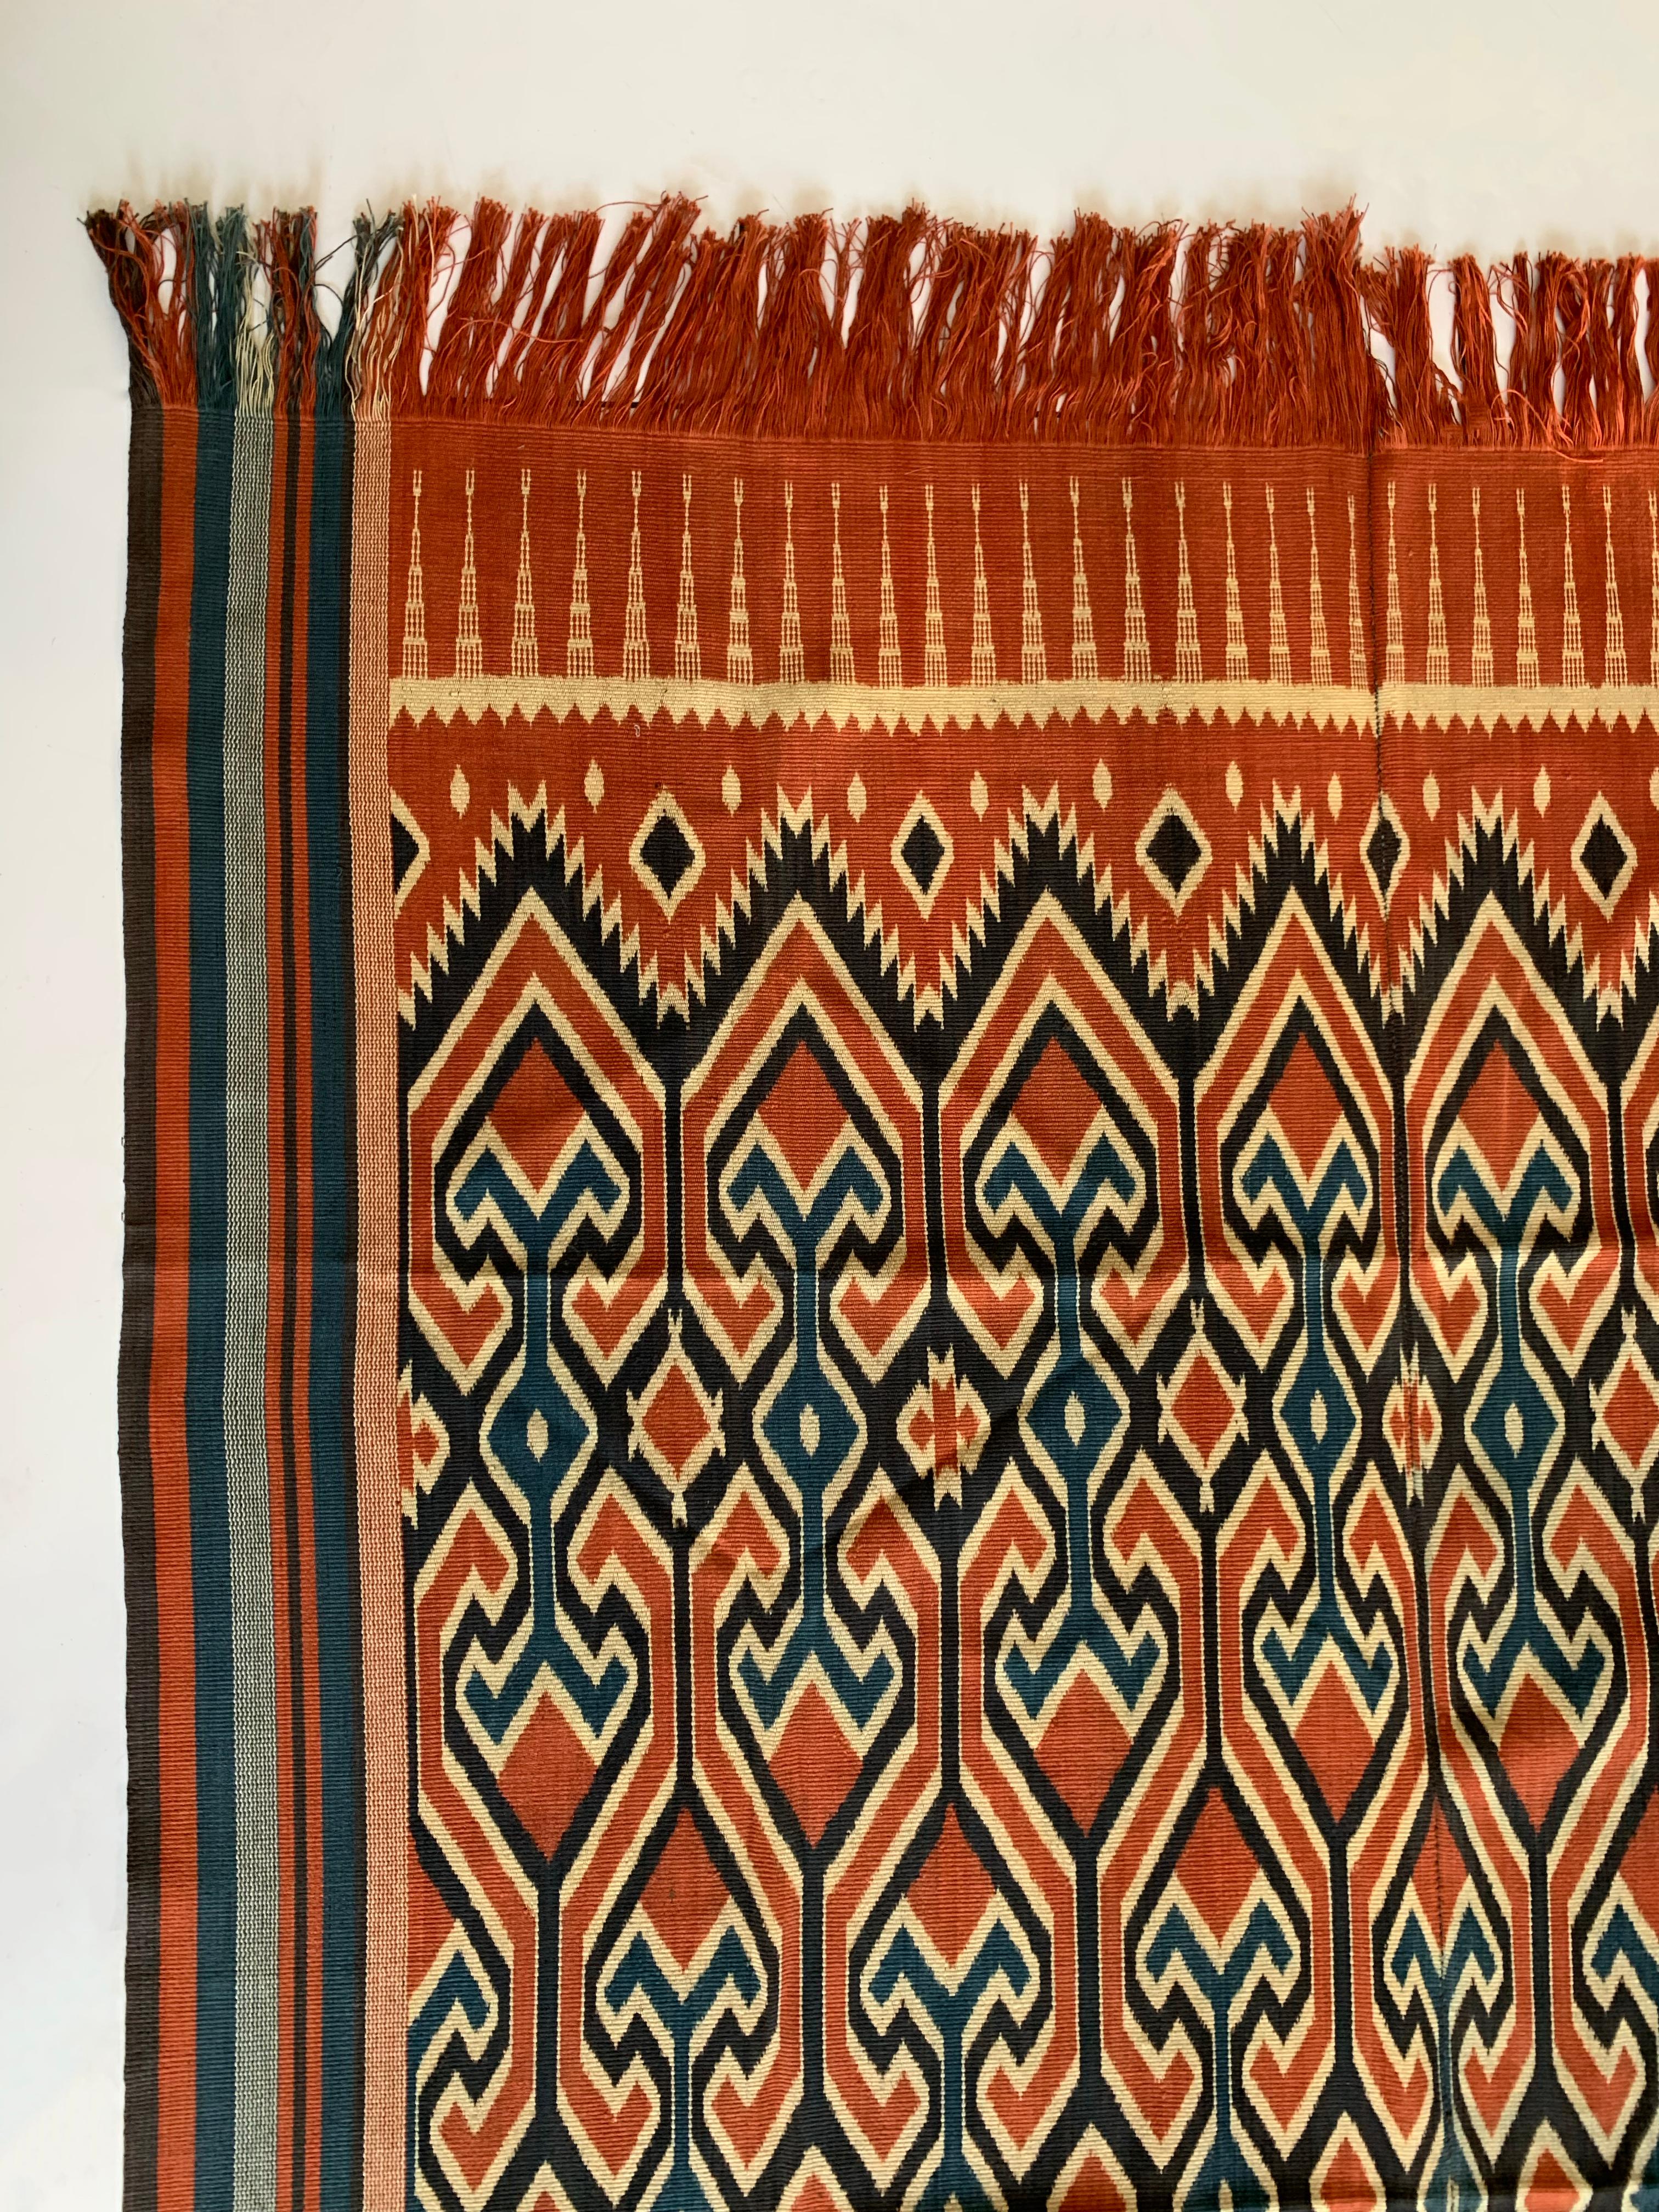 A very large Irate Textile from the Toraja tribes of Sulawesi, Indonesia. The Toraja tribes people are an ethnic and cultural group of people who occupy the mountainous highlands of South Sulawesi, Indonesia. Famous for their unique architecture and